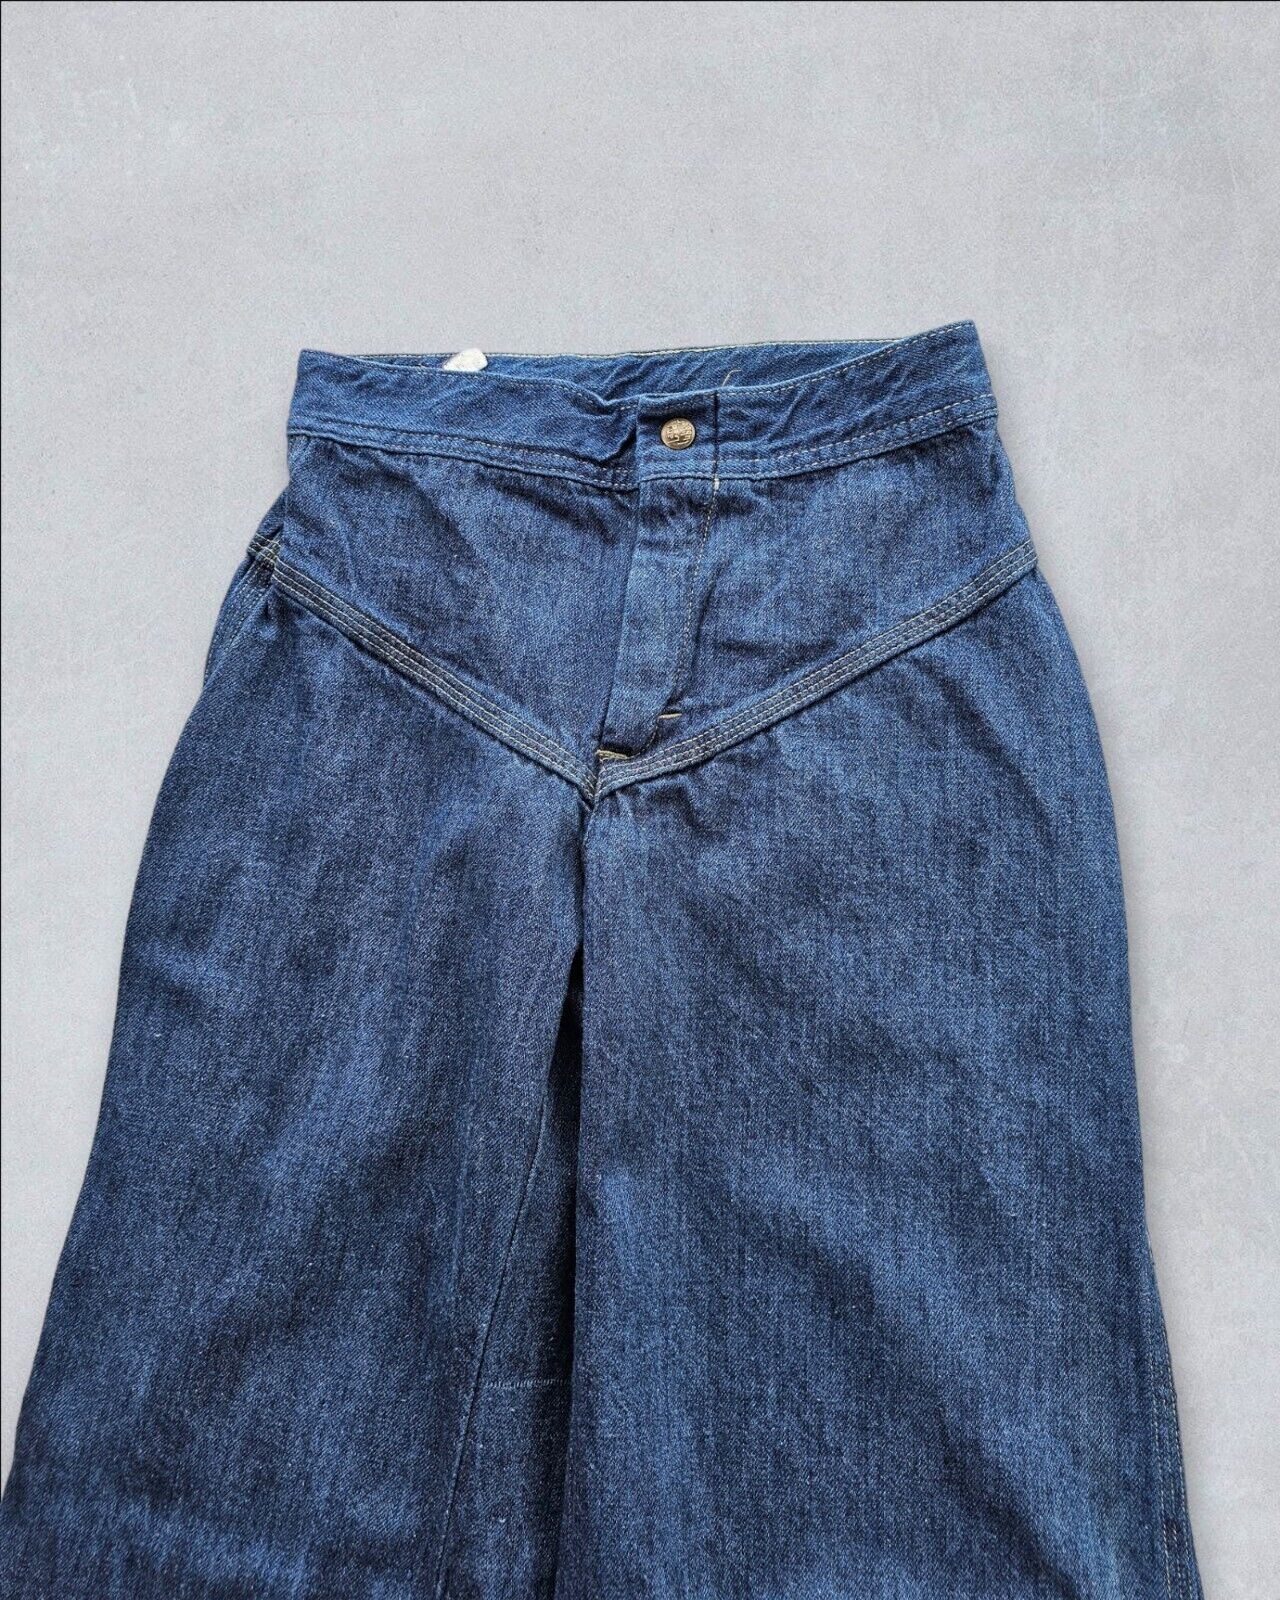 Vintage 1970s Landlubber Extra Wide Flare Leg Denim Blue Jeans Made In Canada 25